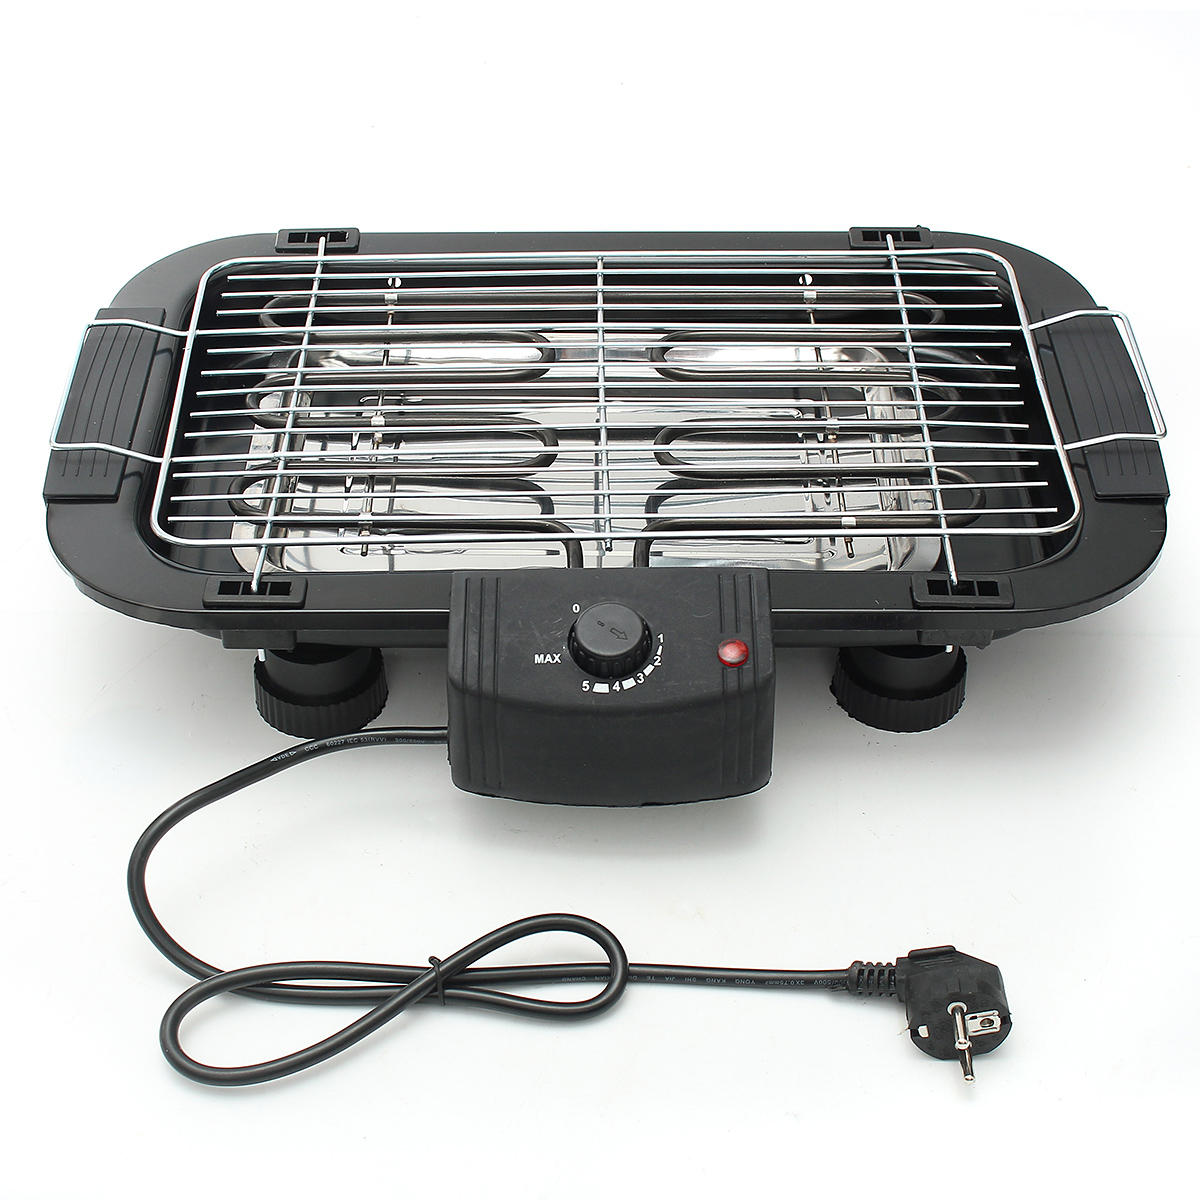 An electric barbecue